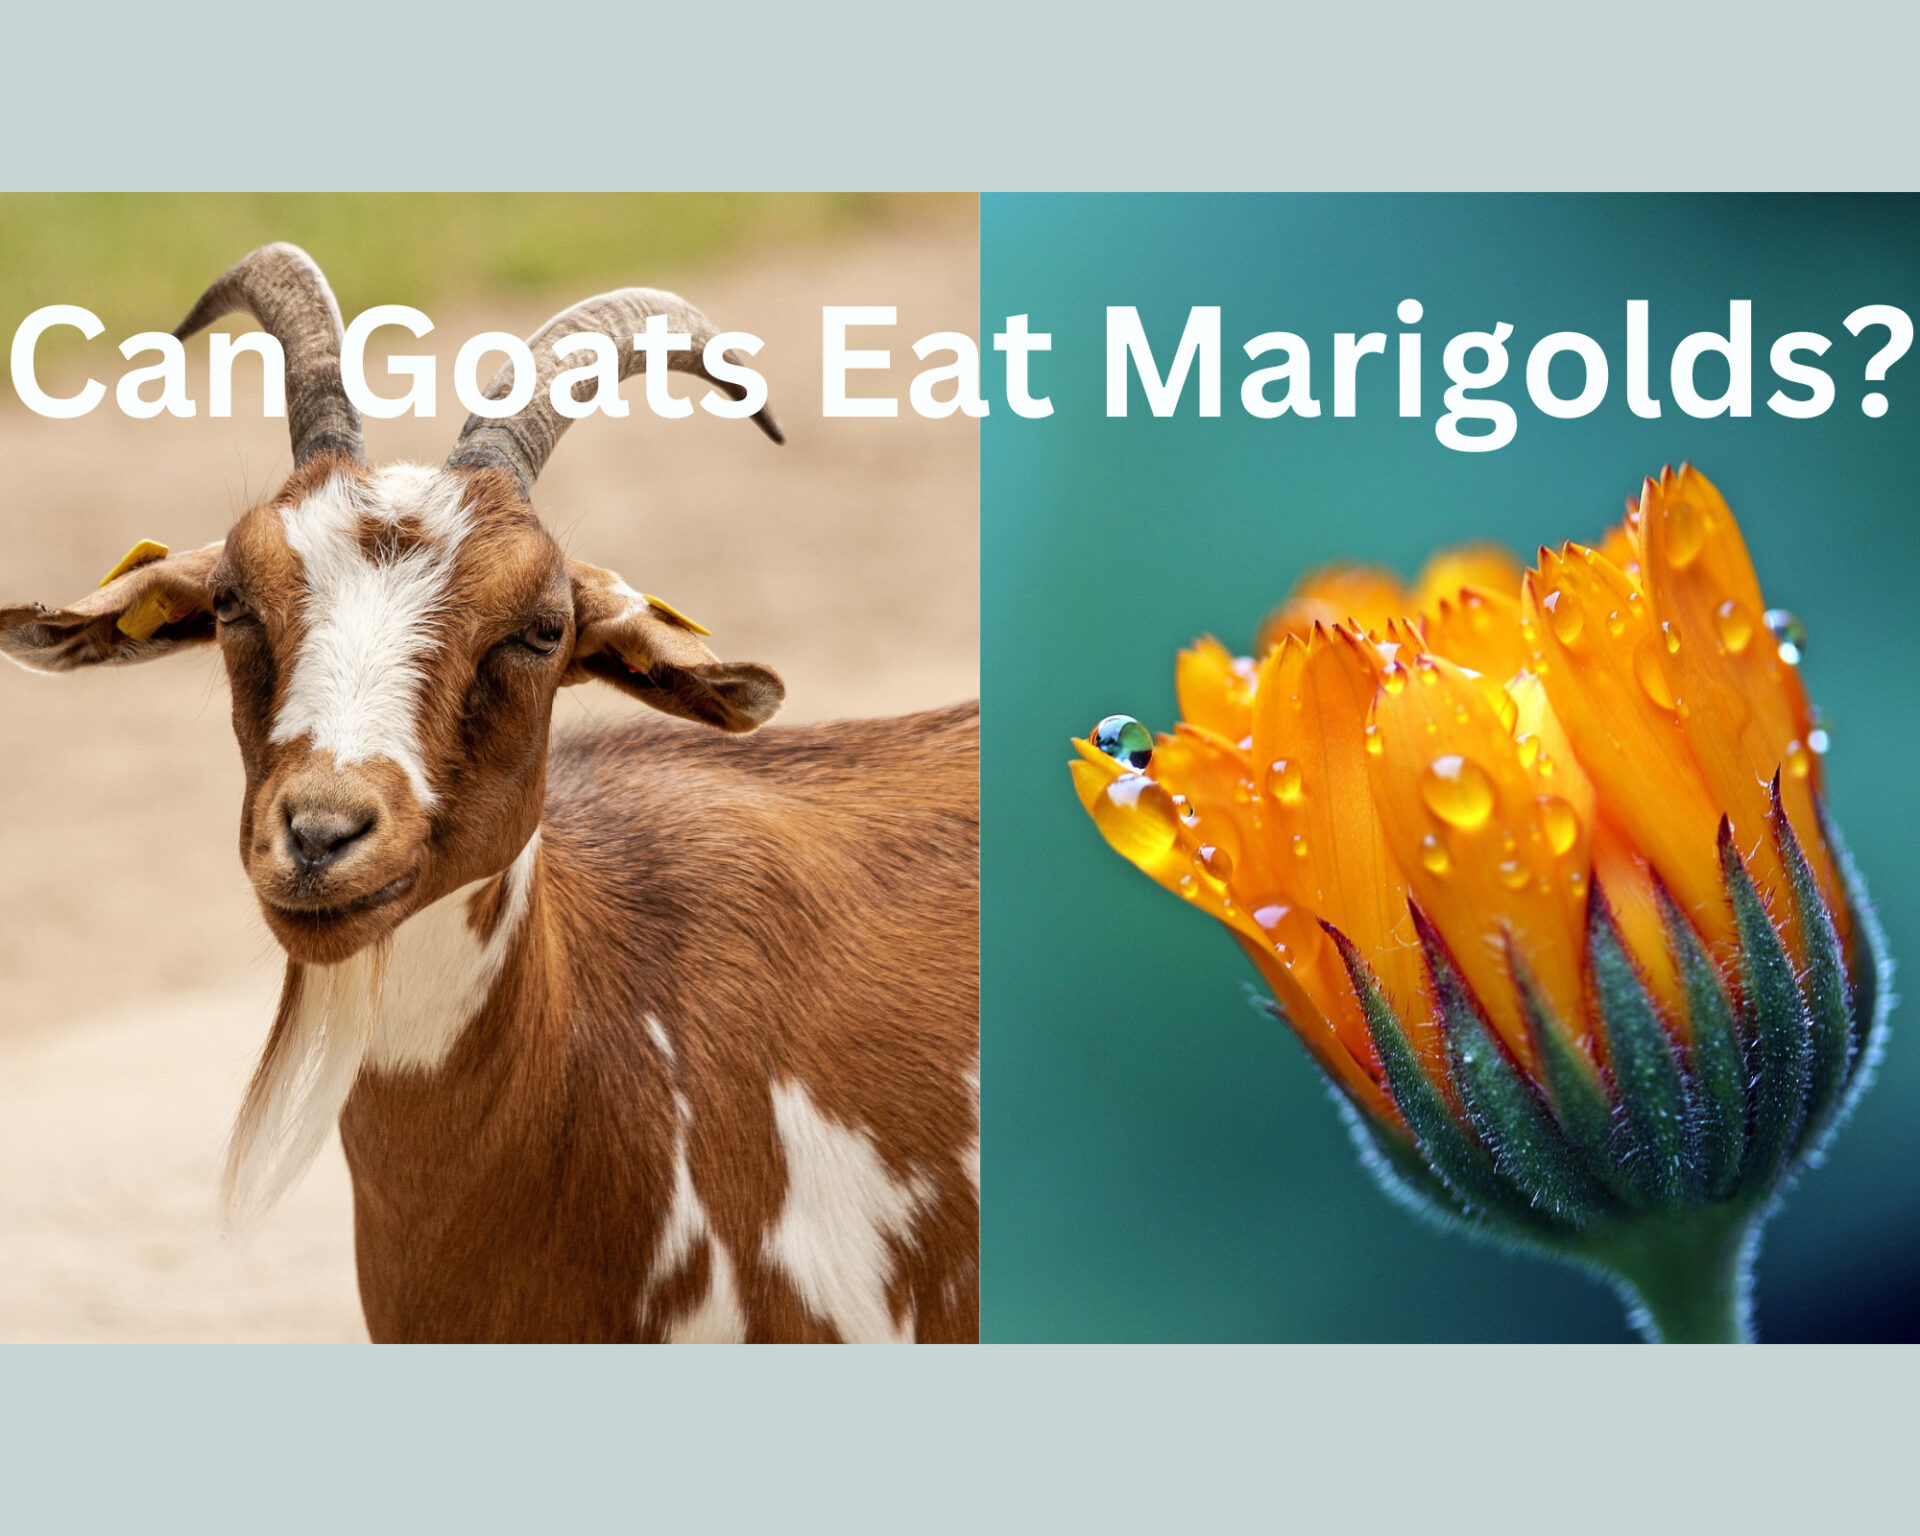 Can Goats Eat Marigolds? (Answered)